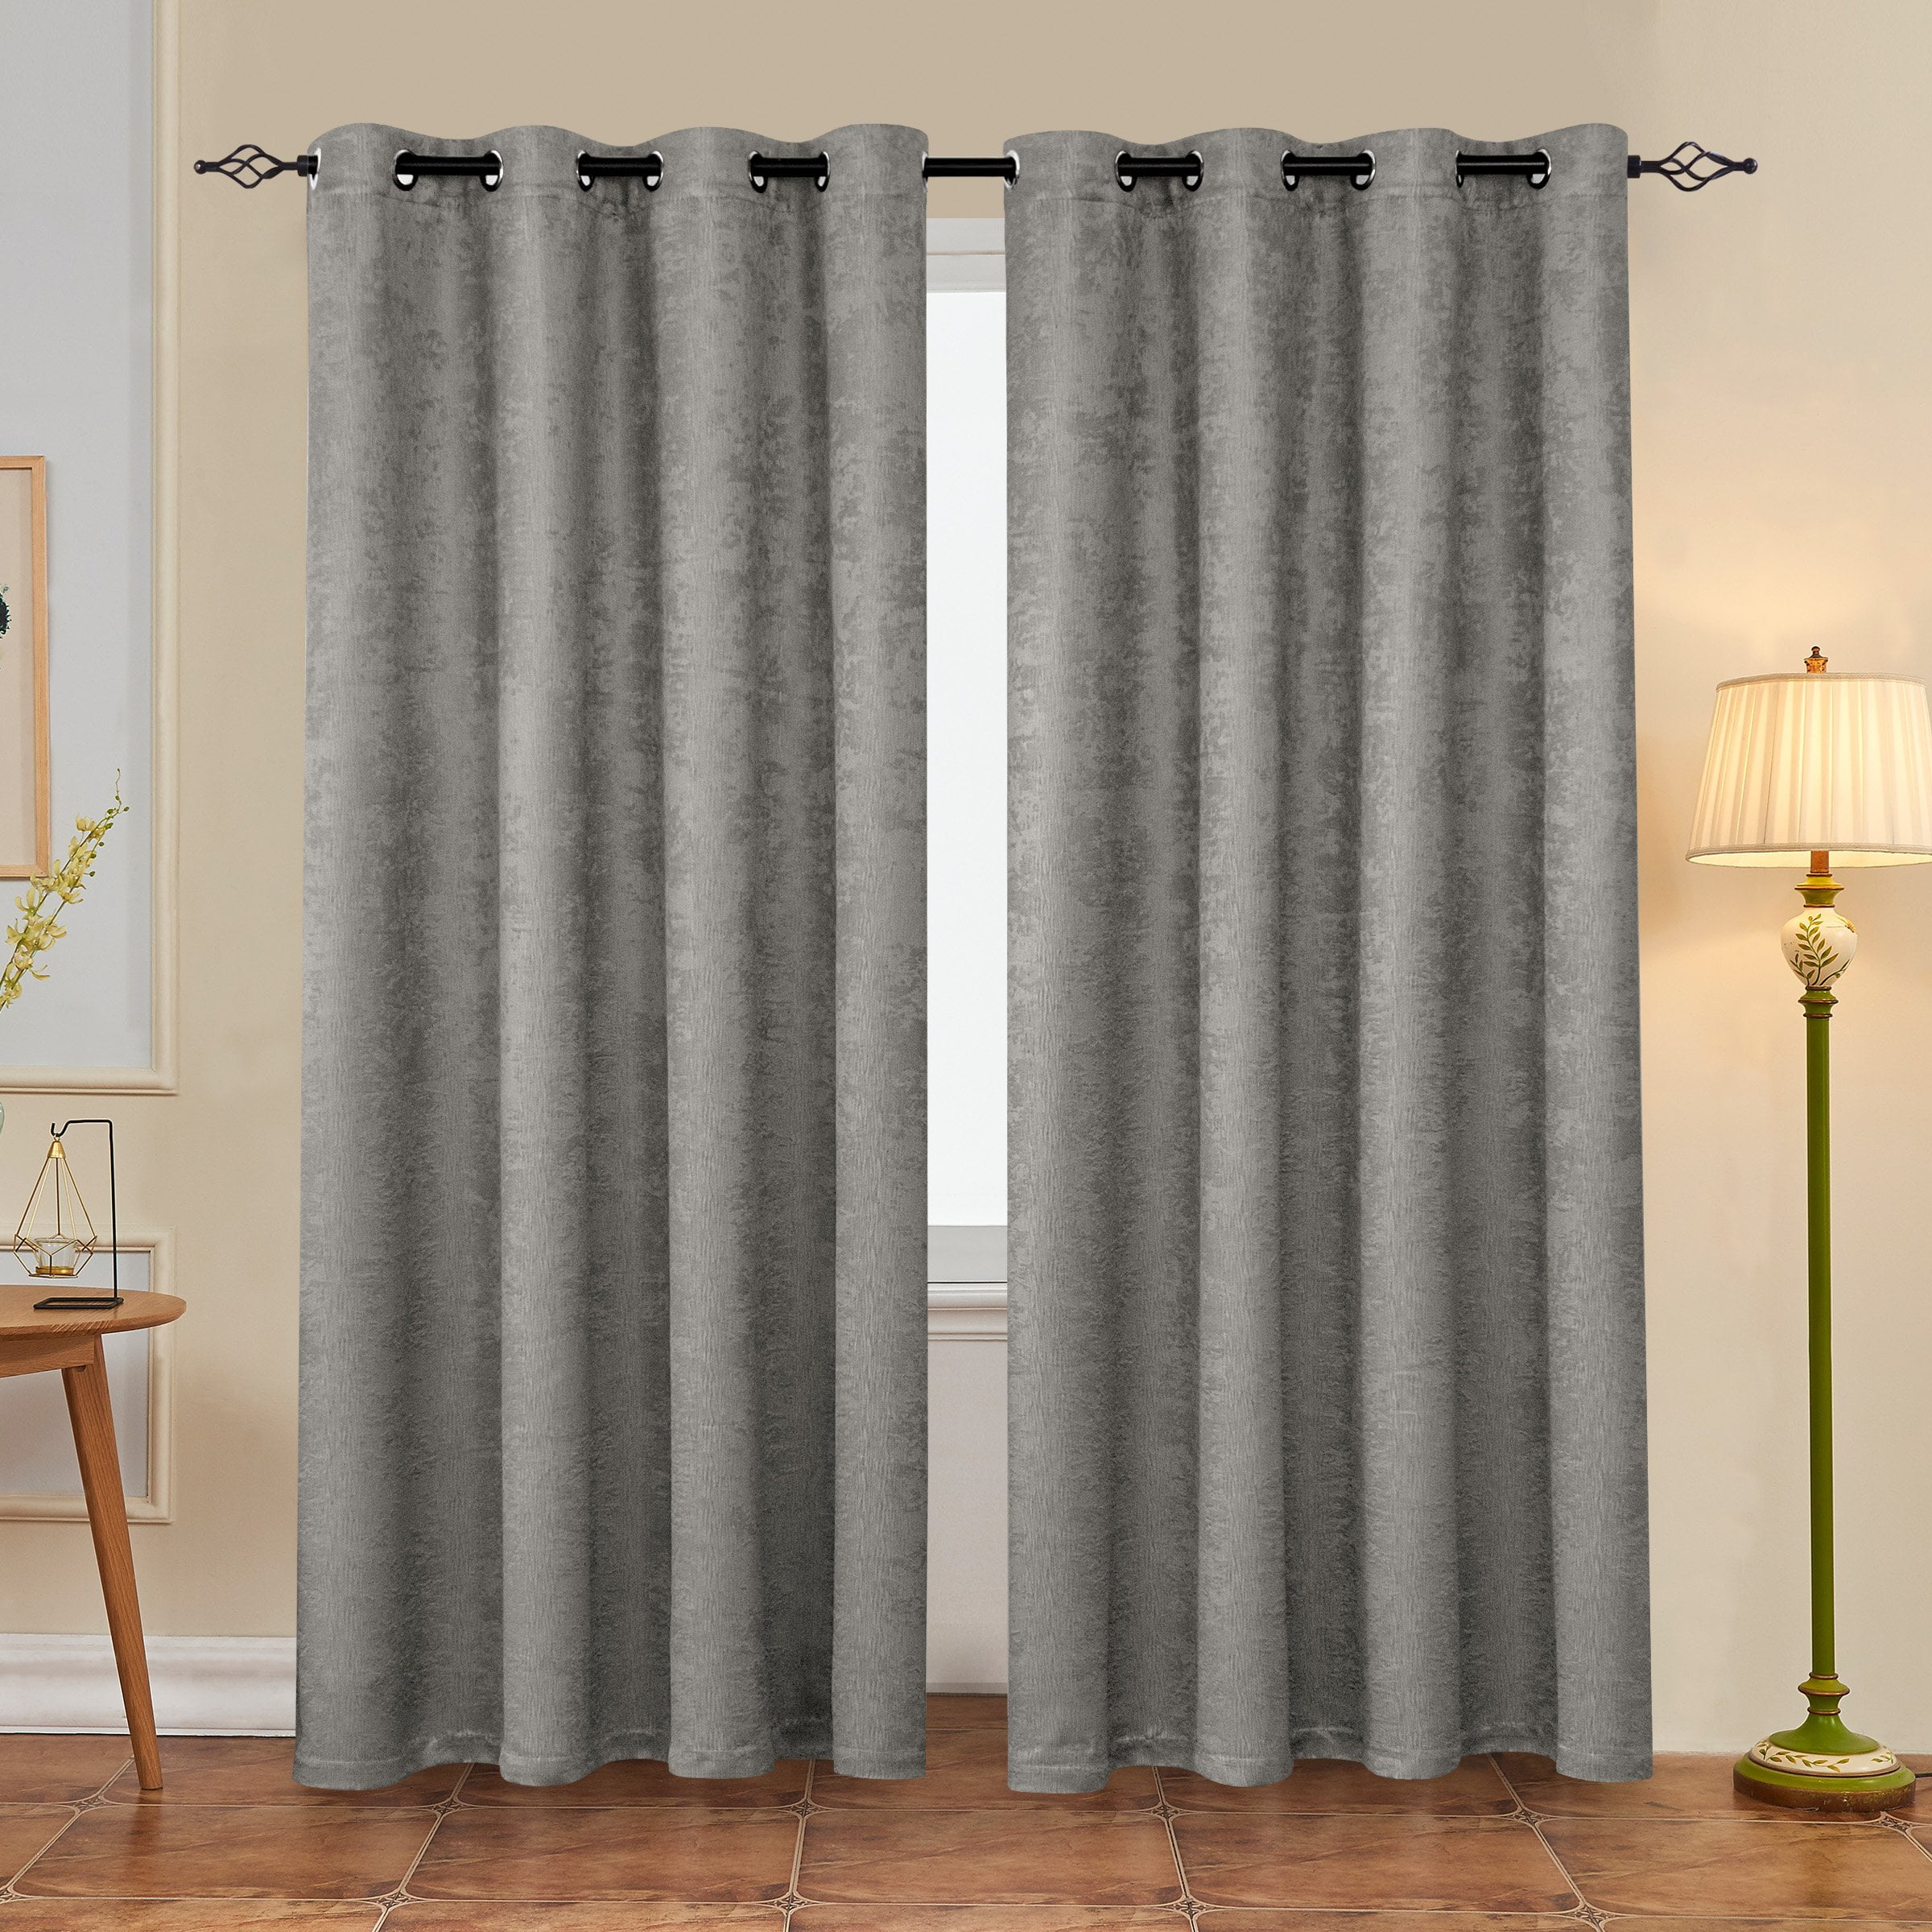 Embossing Solid Blackout Curtains For Bedroom Kitchen Window Decoration Drapes 